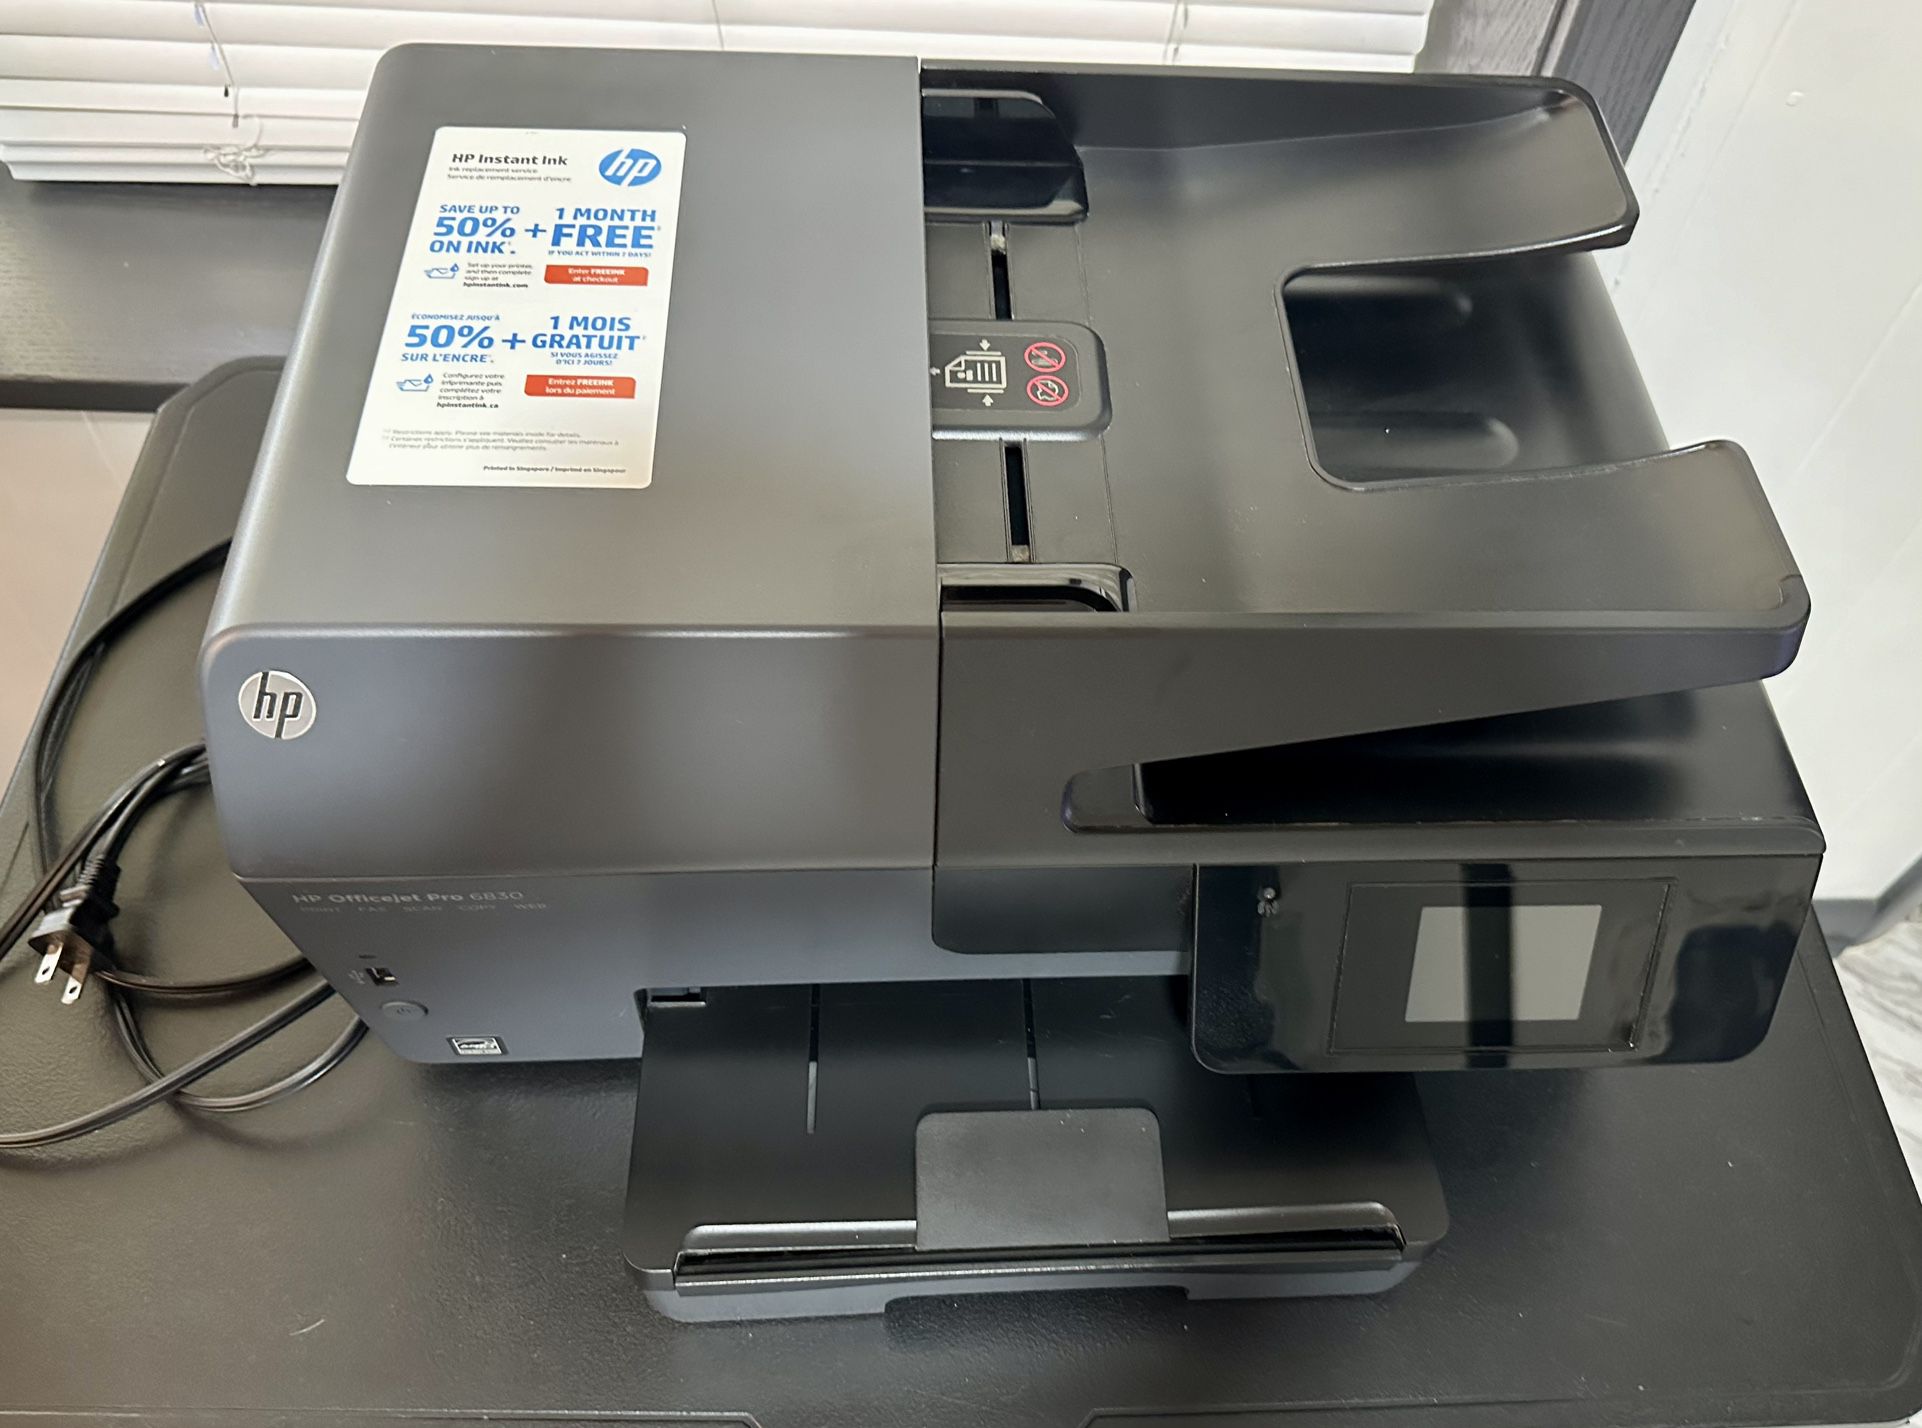 HP OfficeJet Pro 6830 Wireless All-in-One Photo Printer with Mobile Printing, HP Instant Ink 